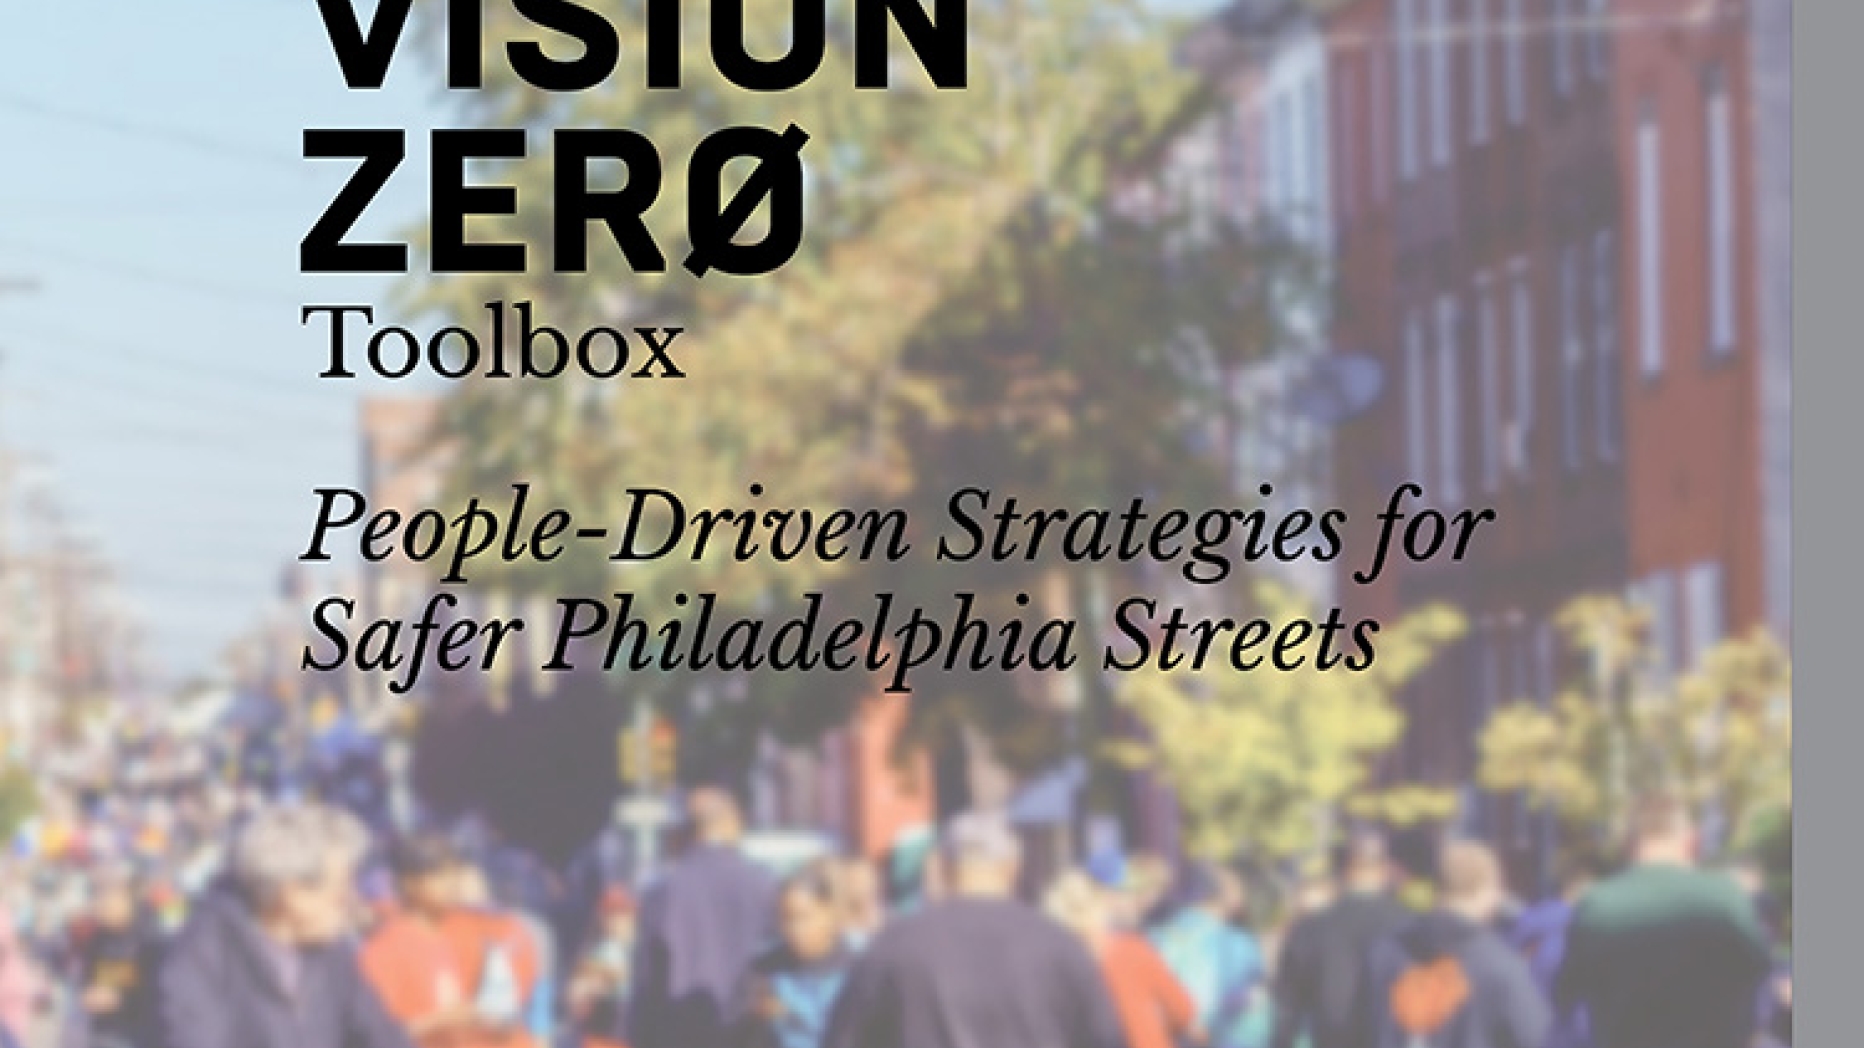 The Vision Zero Toolbox, People-Driven Strategies for safer Philadelphia Streets.